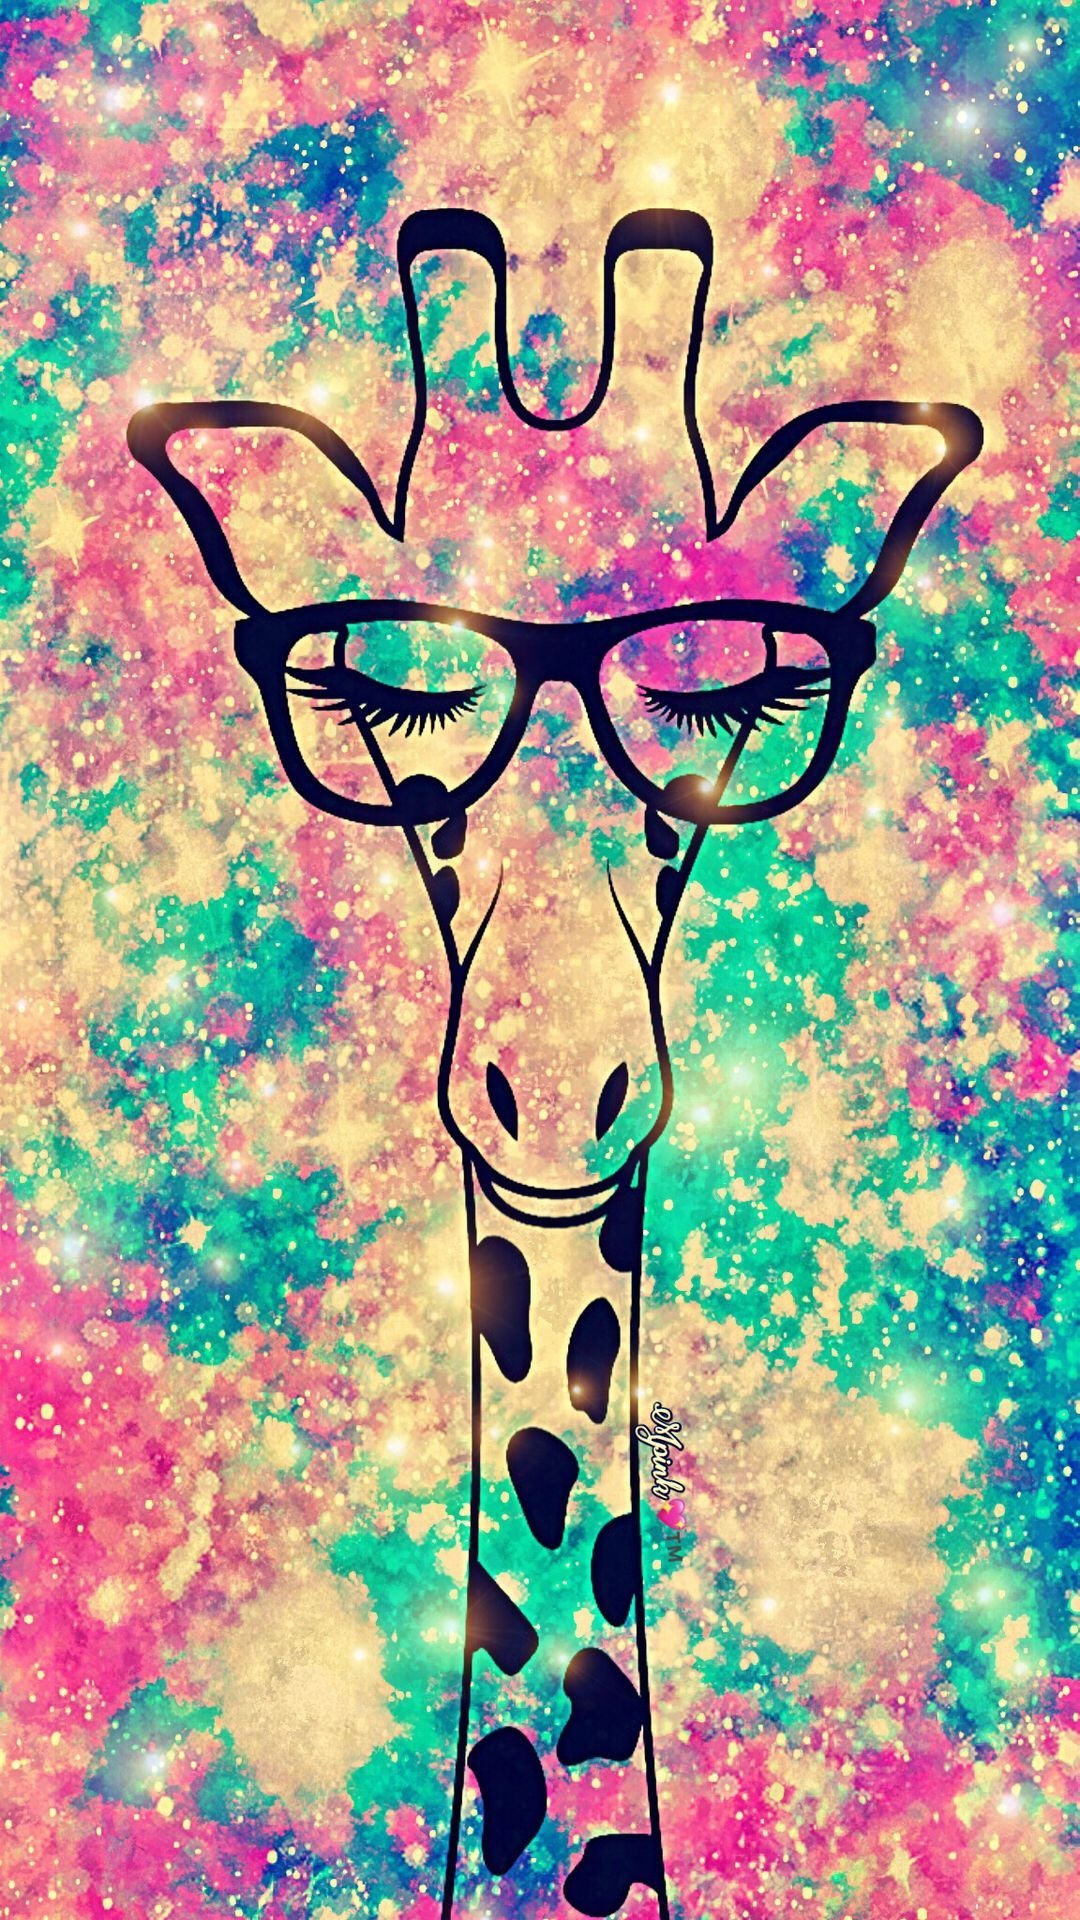 Hipster distinction, Iphone compatible, Aesthetic appeal, Contemporary design, Artistic expression, 1080x1920 Full HD Phone